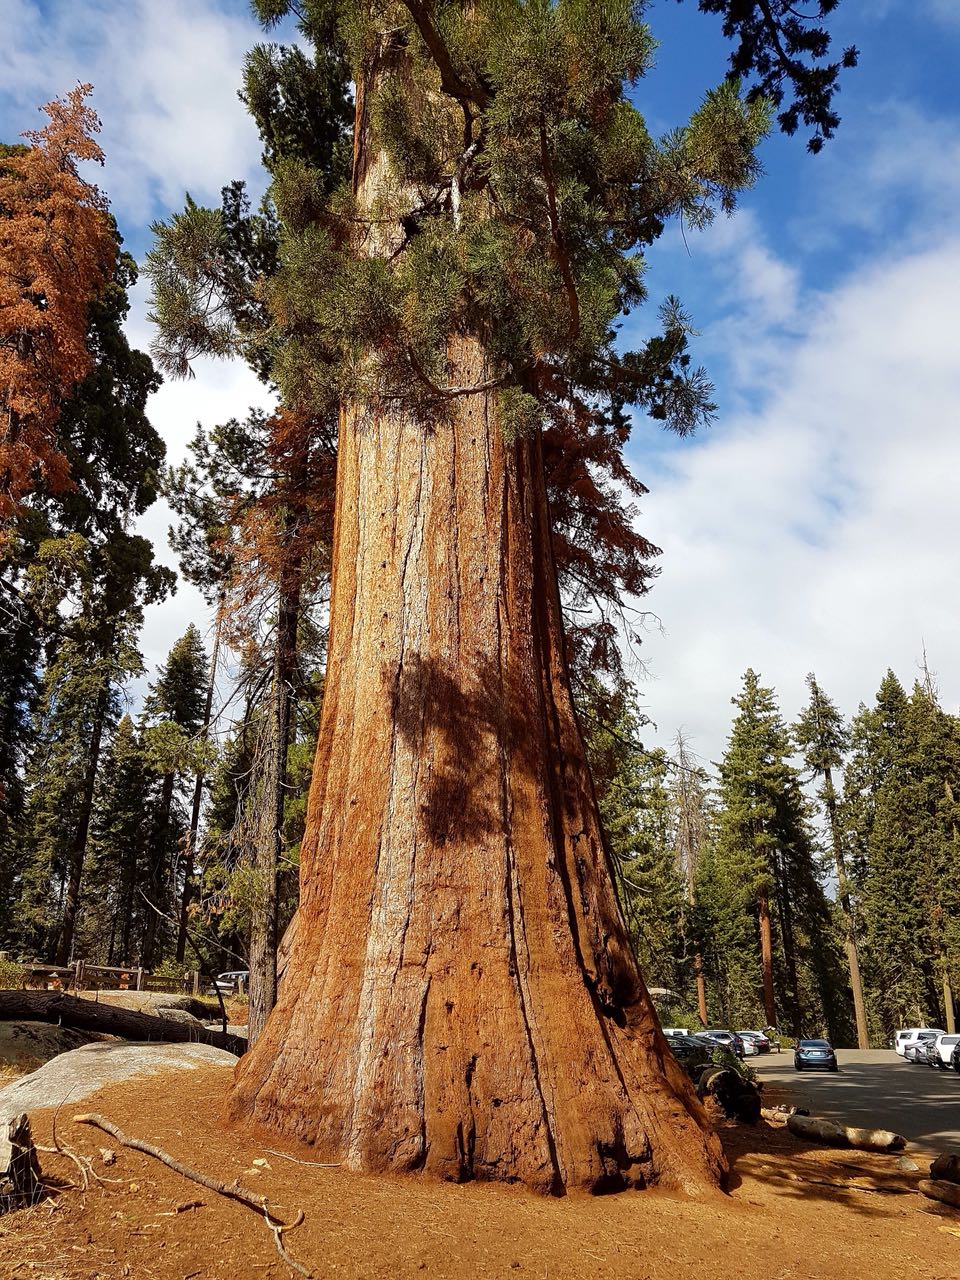 World’s largest living organisms- the Giant Sequoia in California